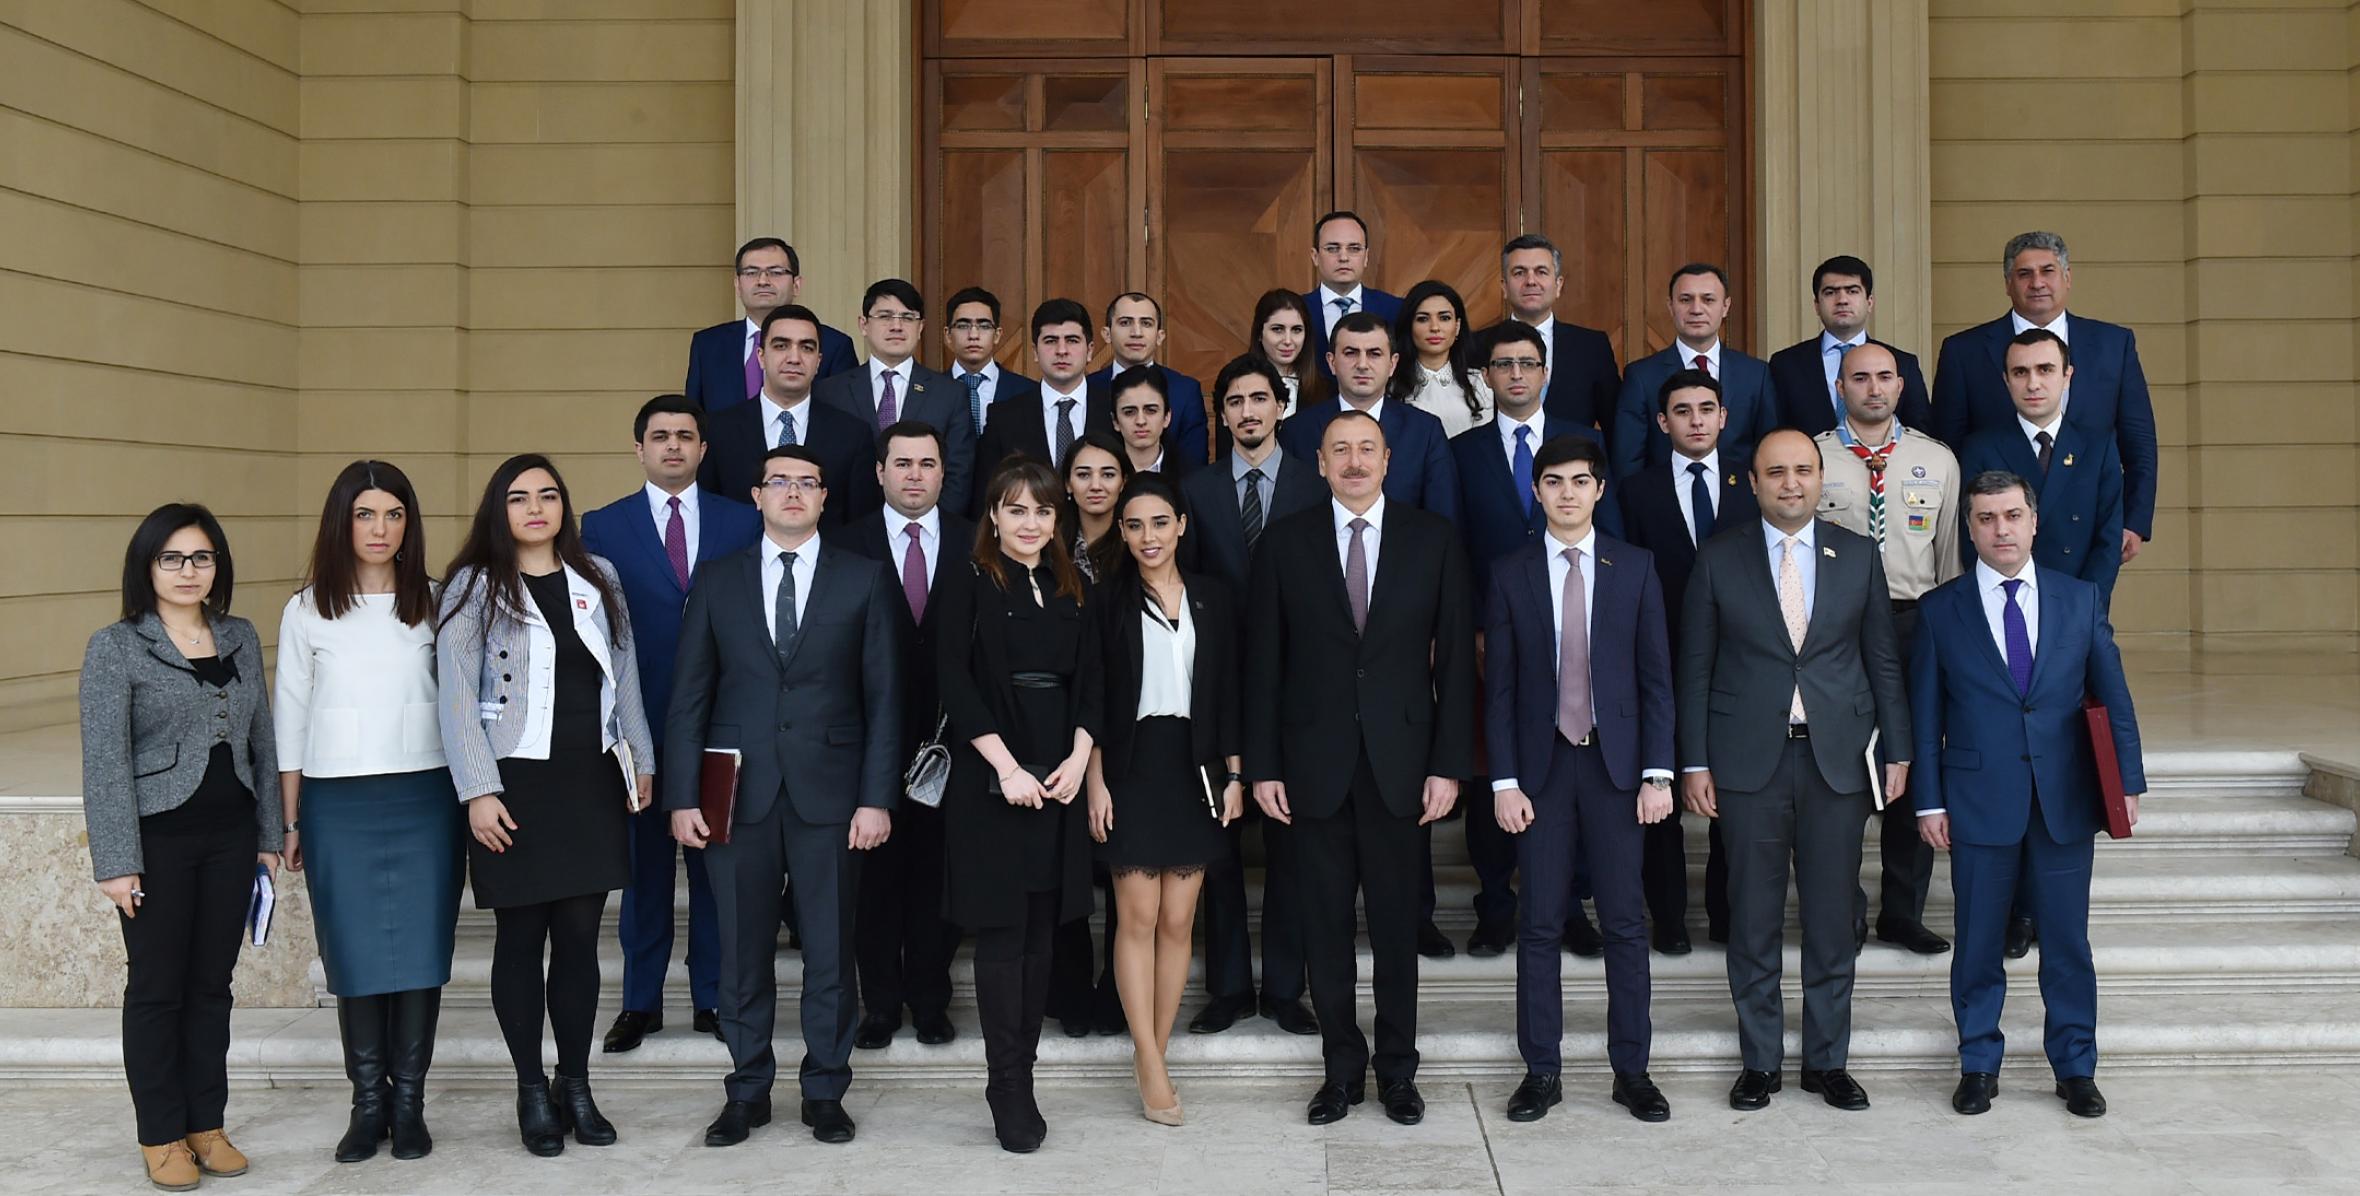 Ilham Aliyev met with a group of Azerbaijani youth